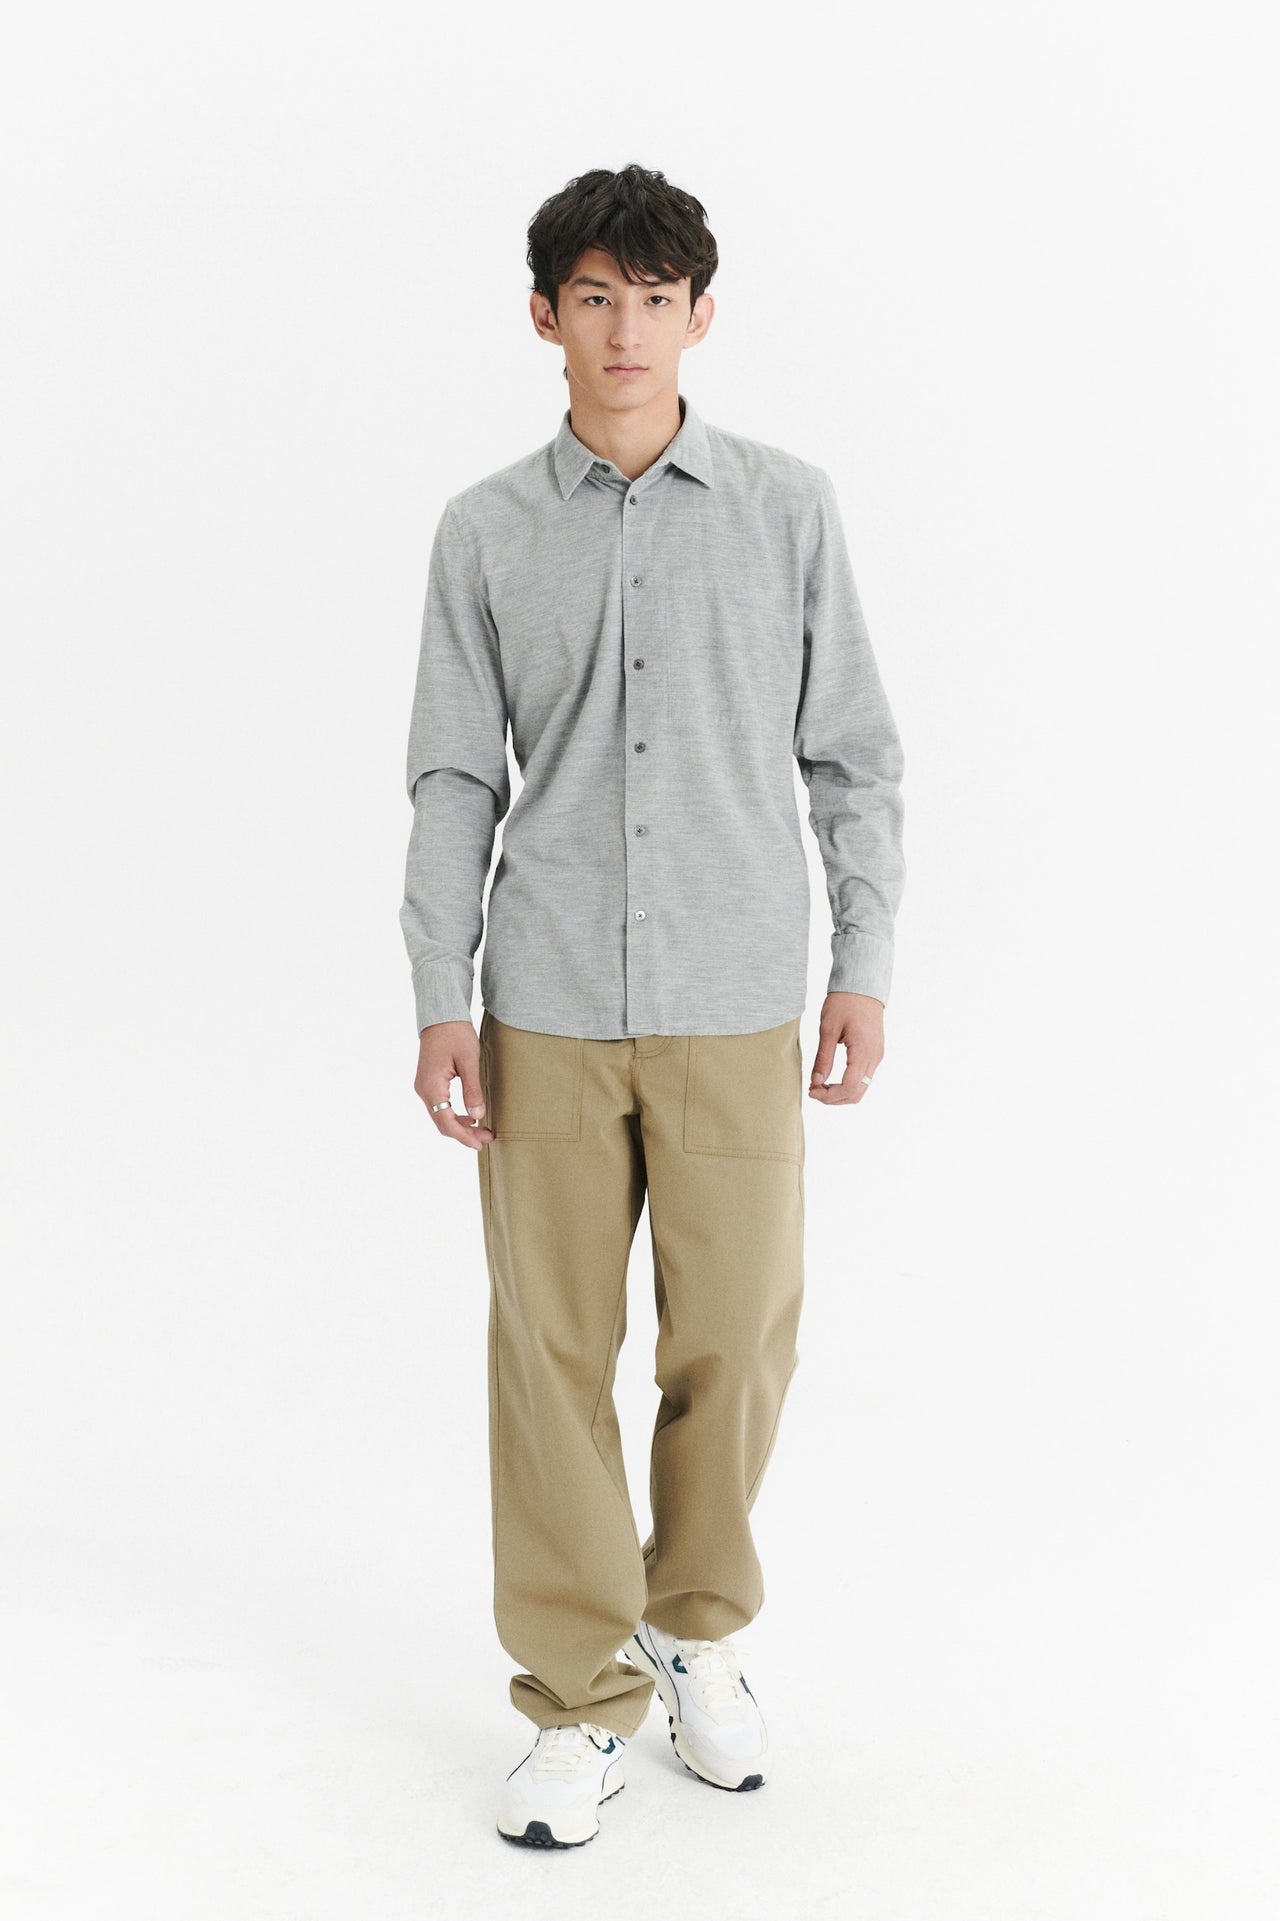 Feel Good Shirt in a Grey Japanese Soft Corduroy Cotton